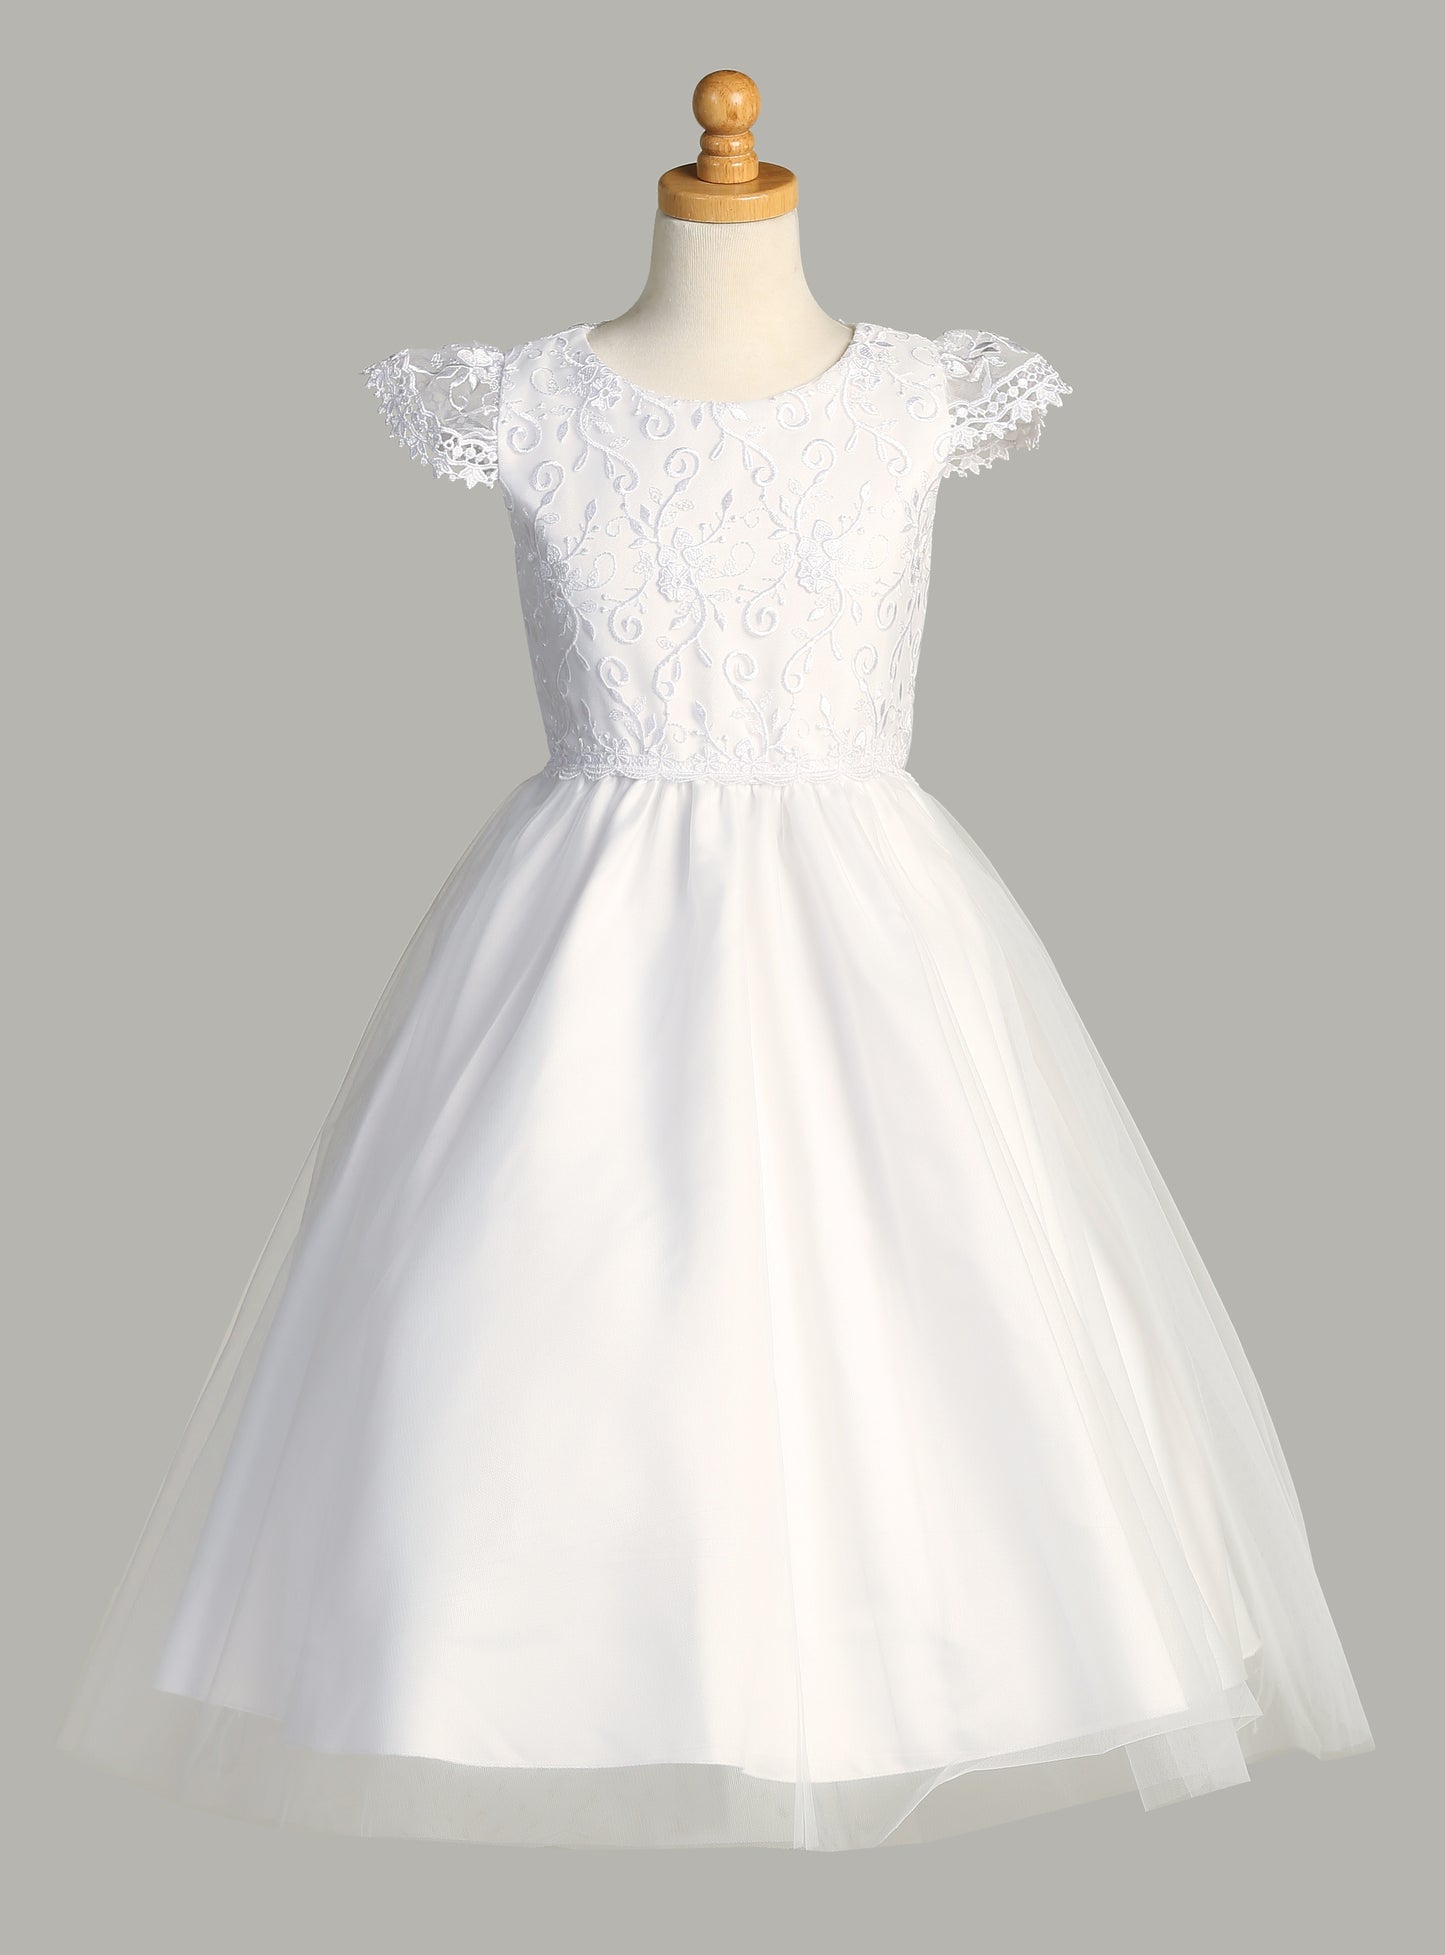 Embroidered Tulle Bodice First Communion Dress with Tulle Skirt - SP189